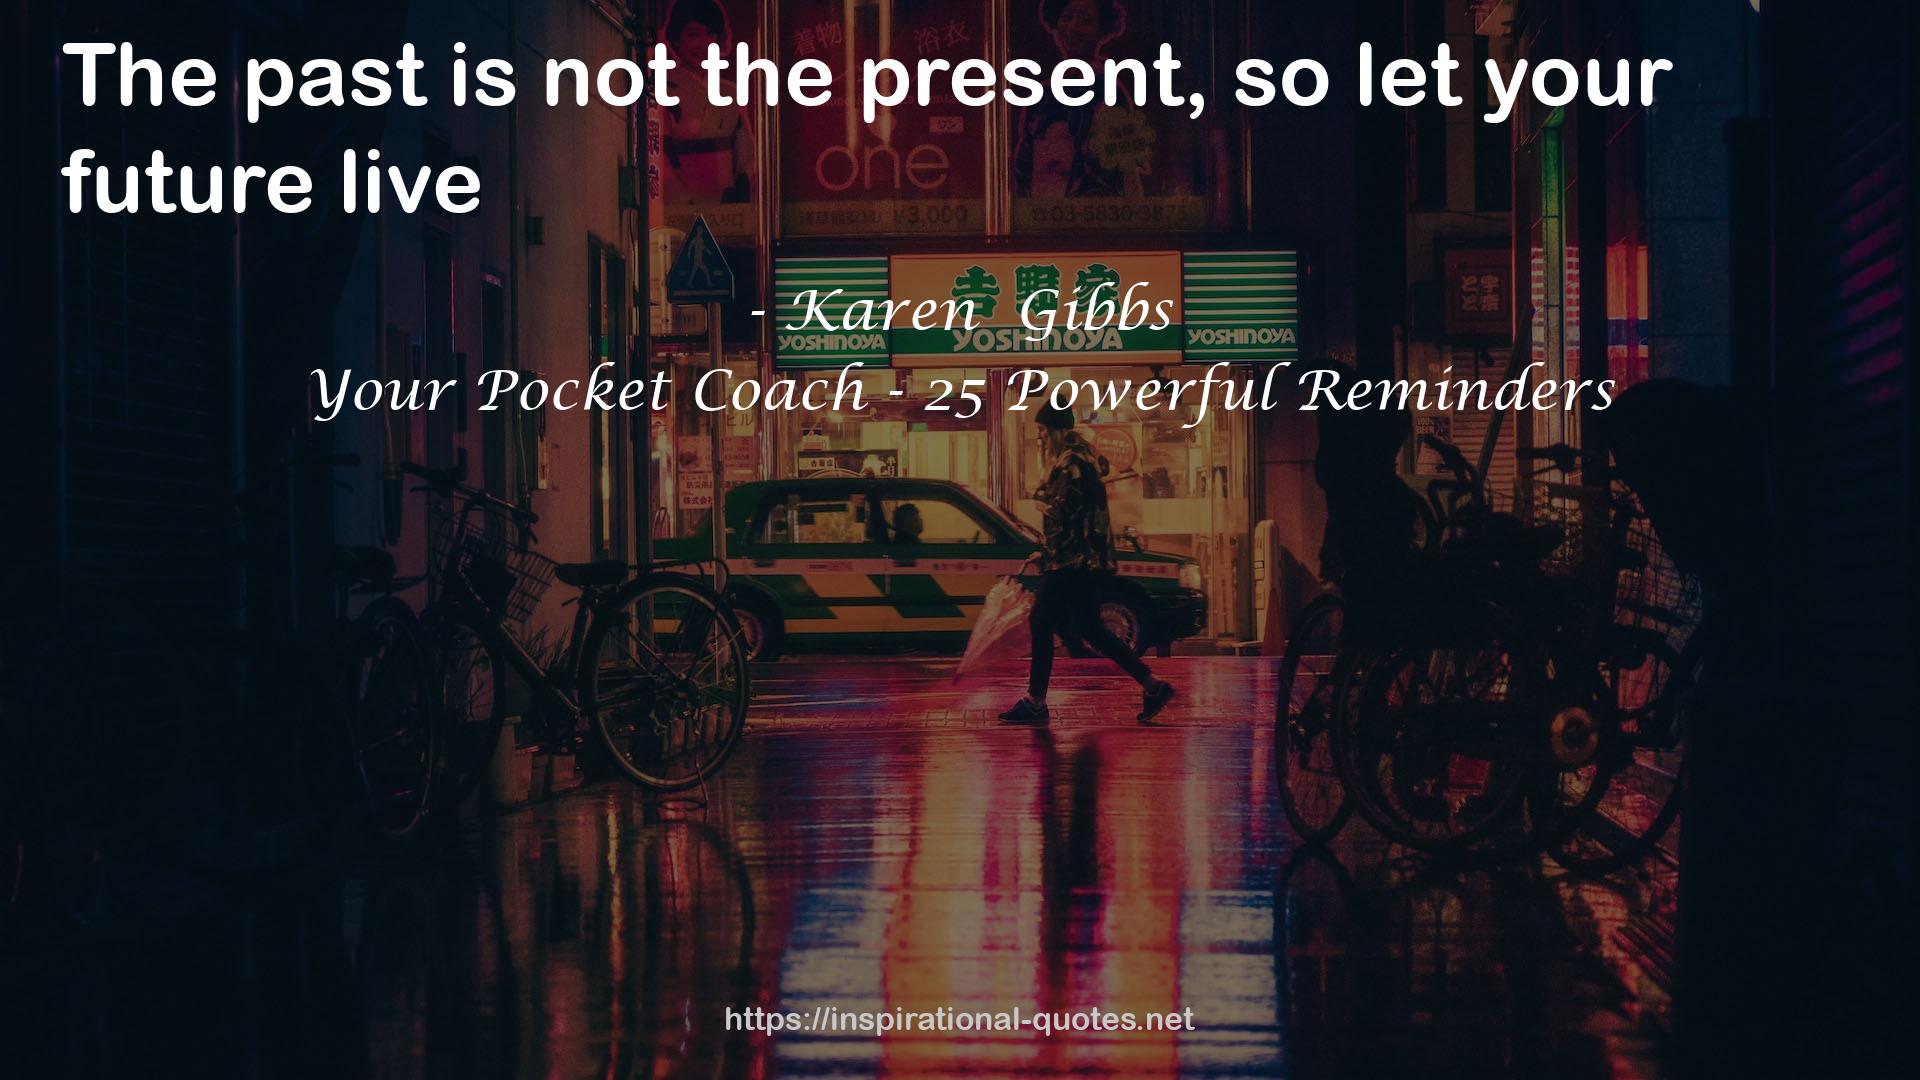 Your Pocket Coach - 25 Powerful Reminders QUOTES